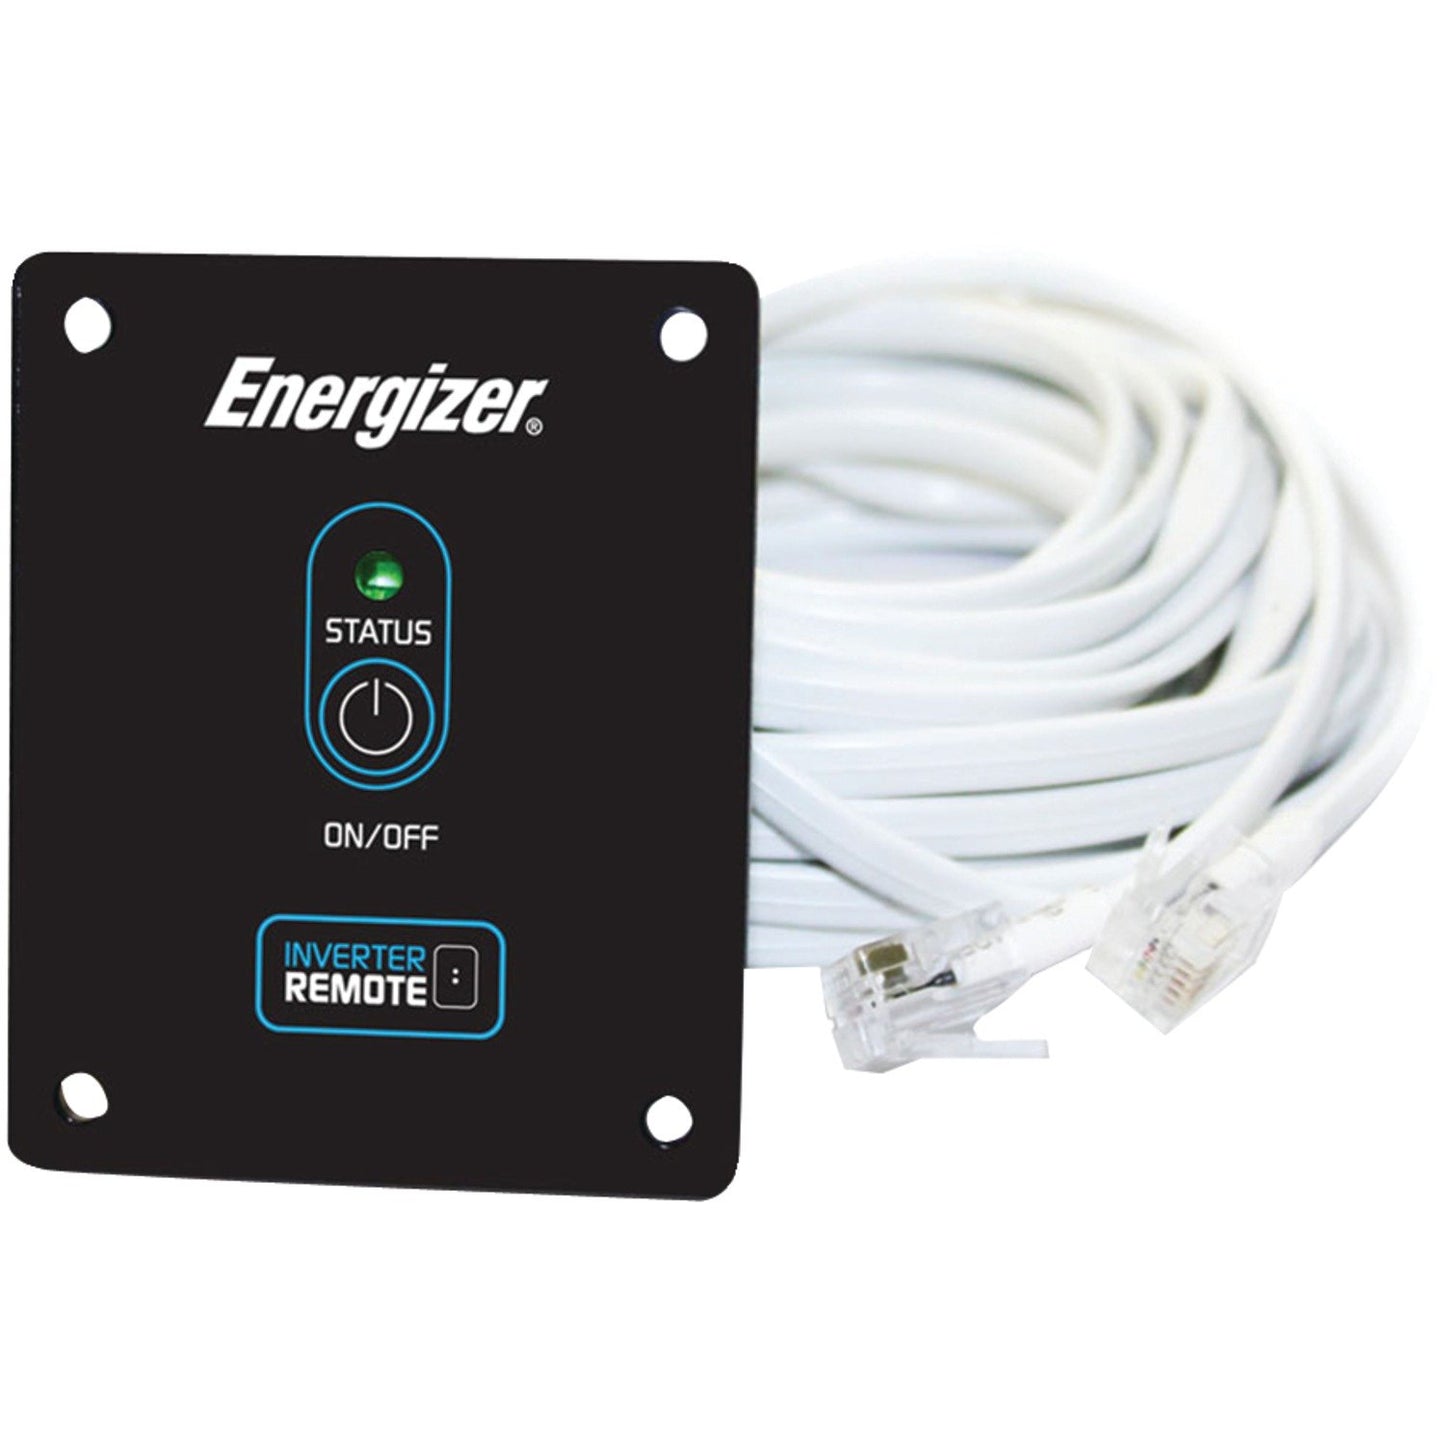 Energizer ENR100 Inverter Remote with 20-Foot Cable